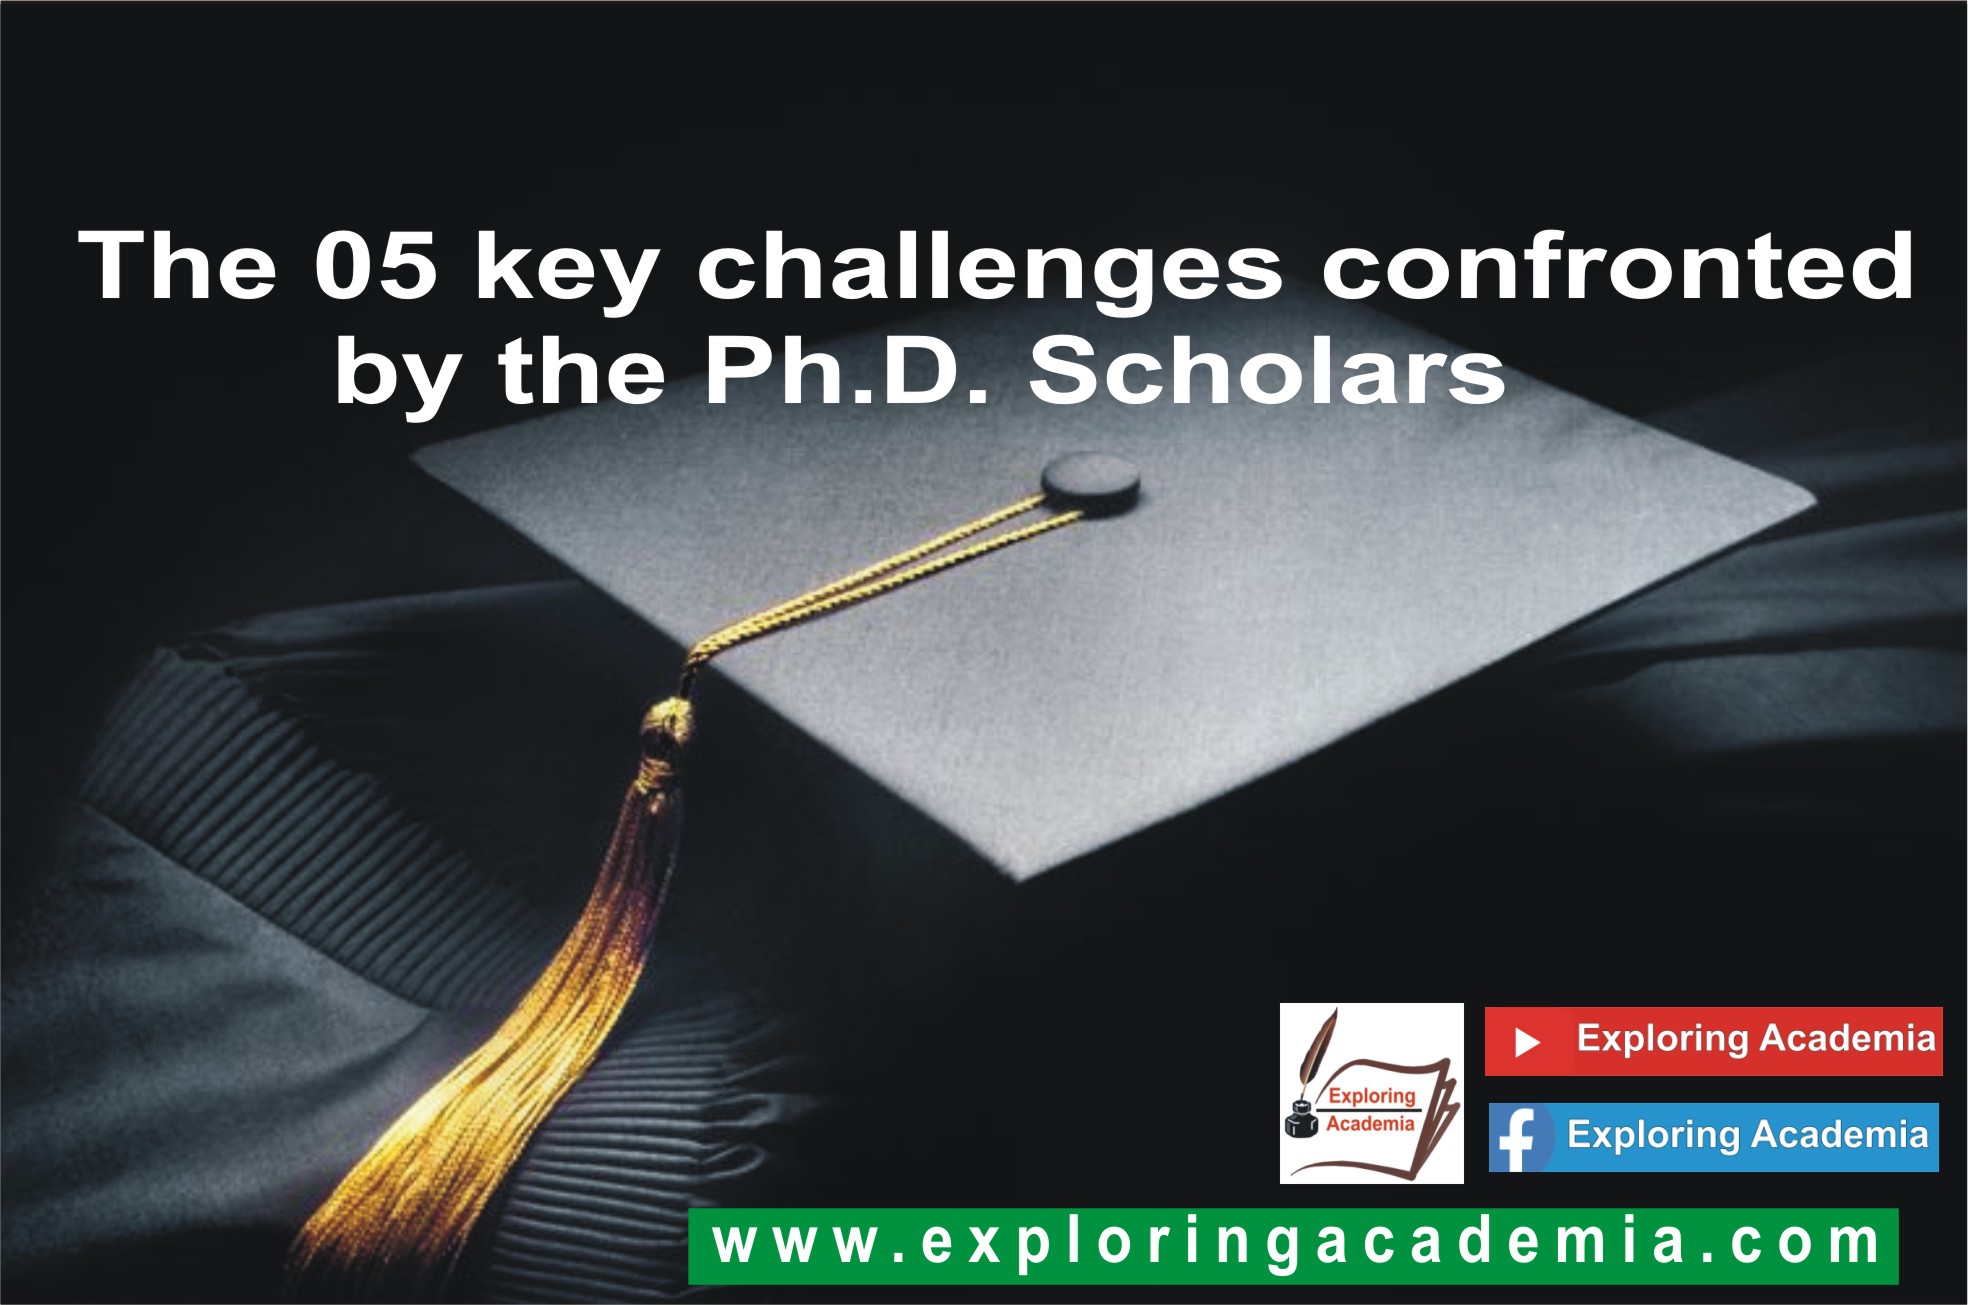 The 05 key challenges confronted by the PhD scholars